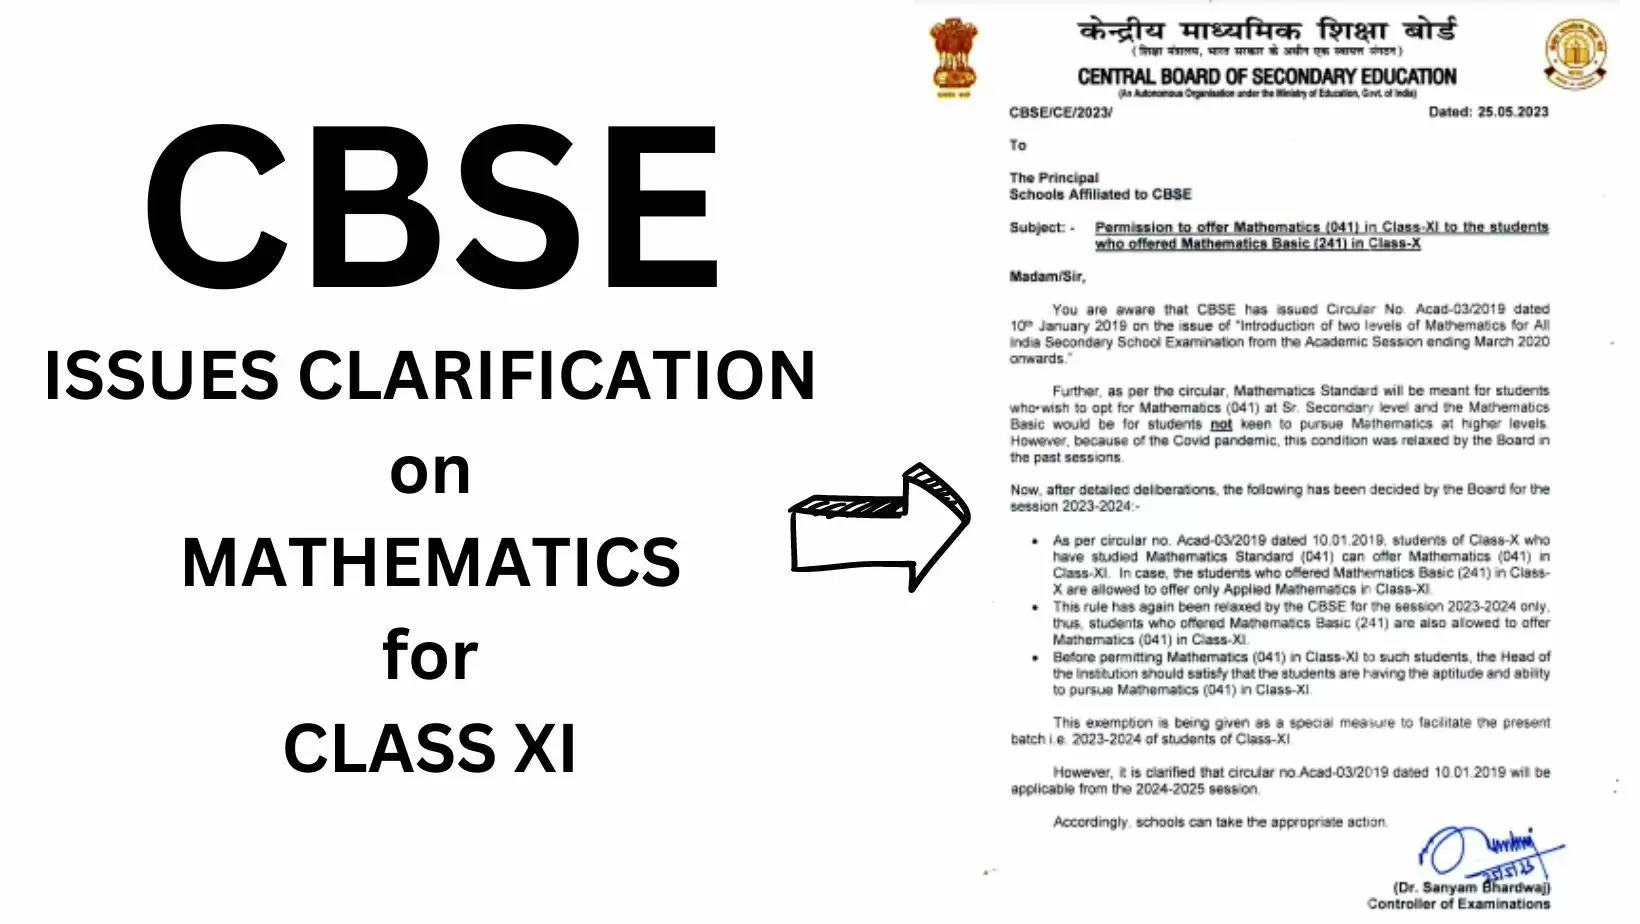 CBSE Issues Clarification for Permission to Offer Mathematics in Class 11 for students of 2023-24